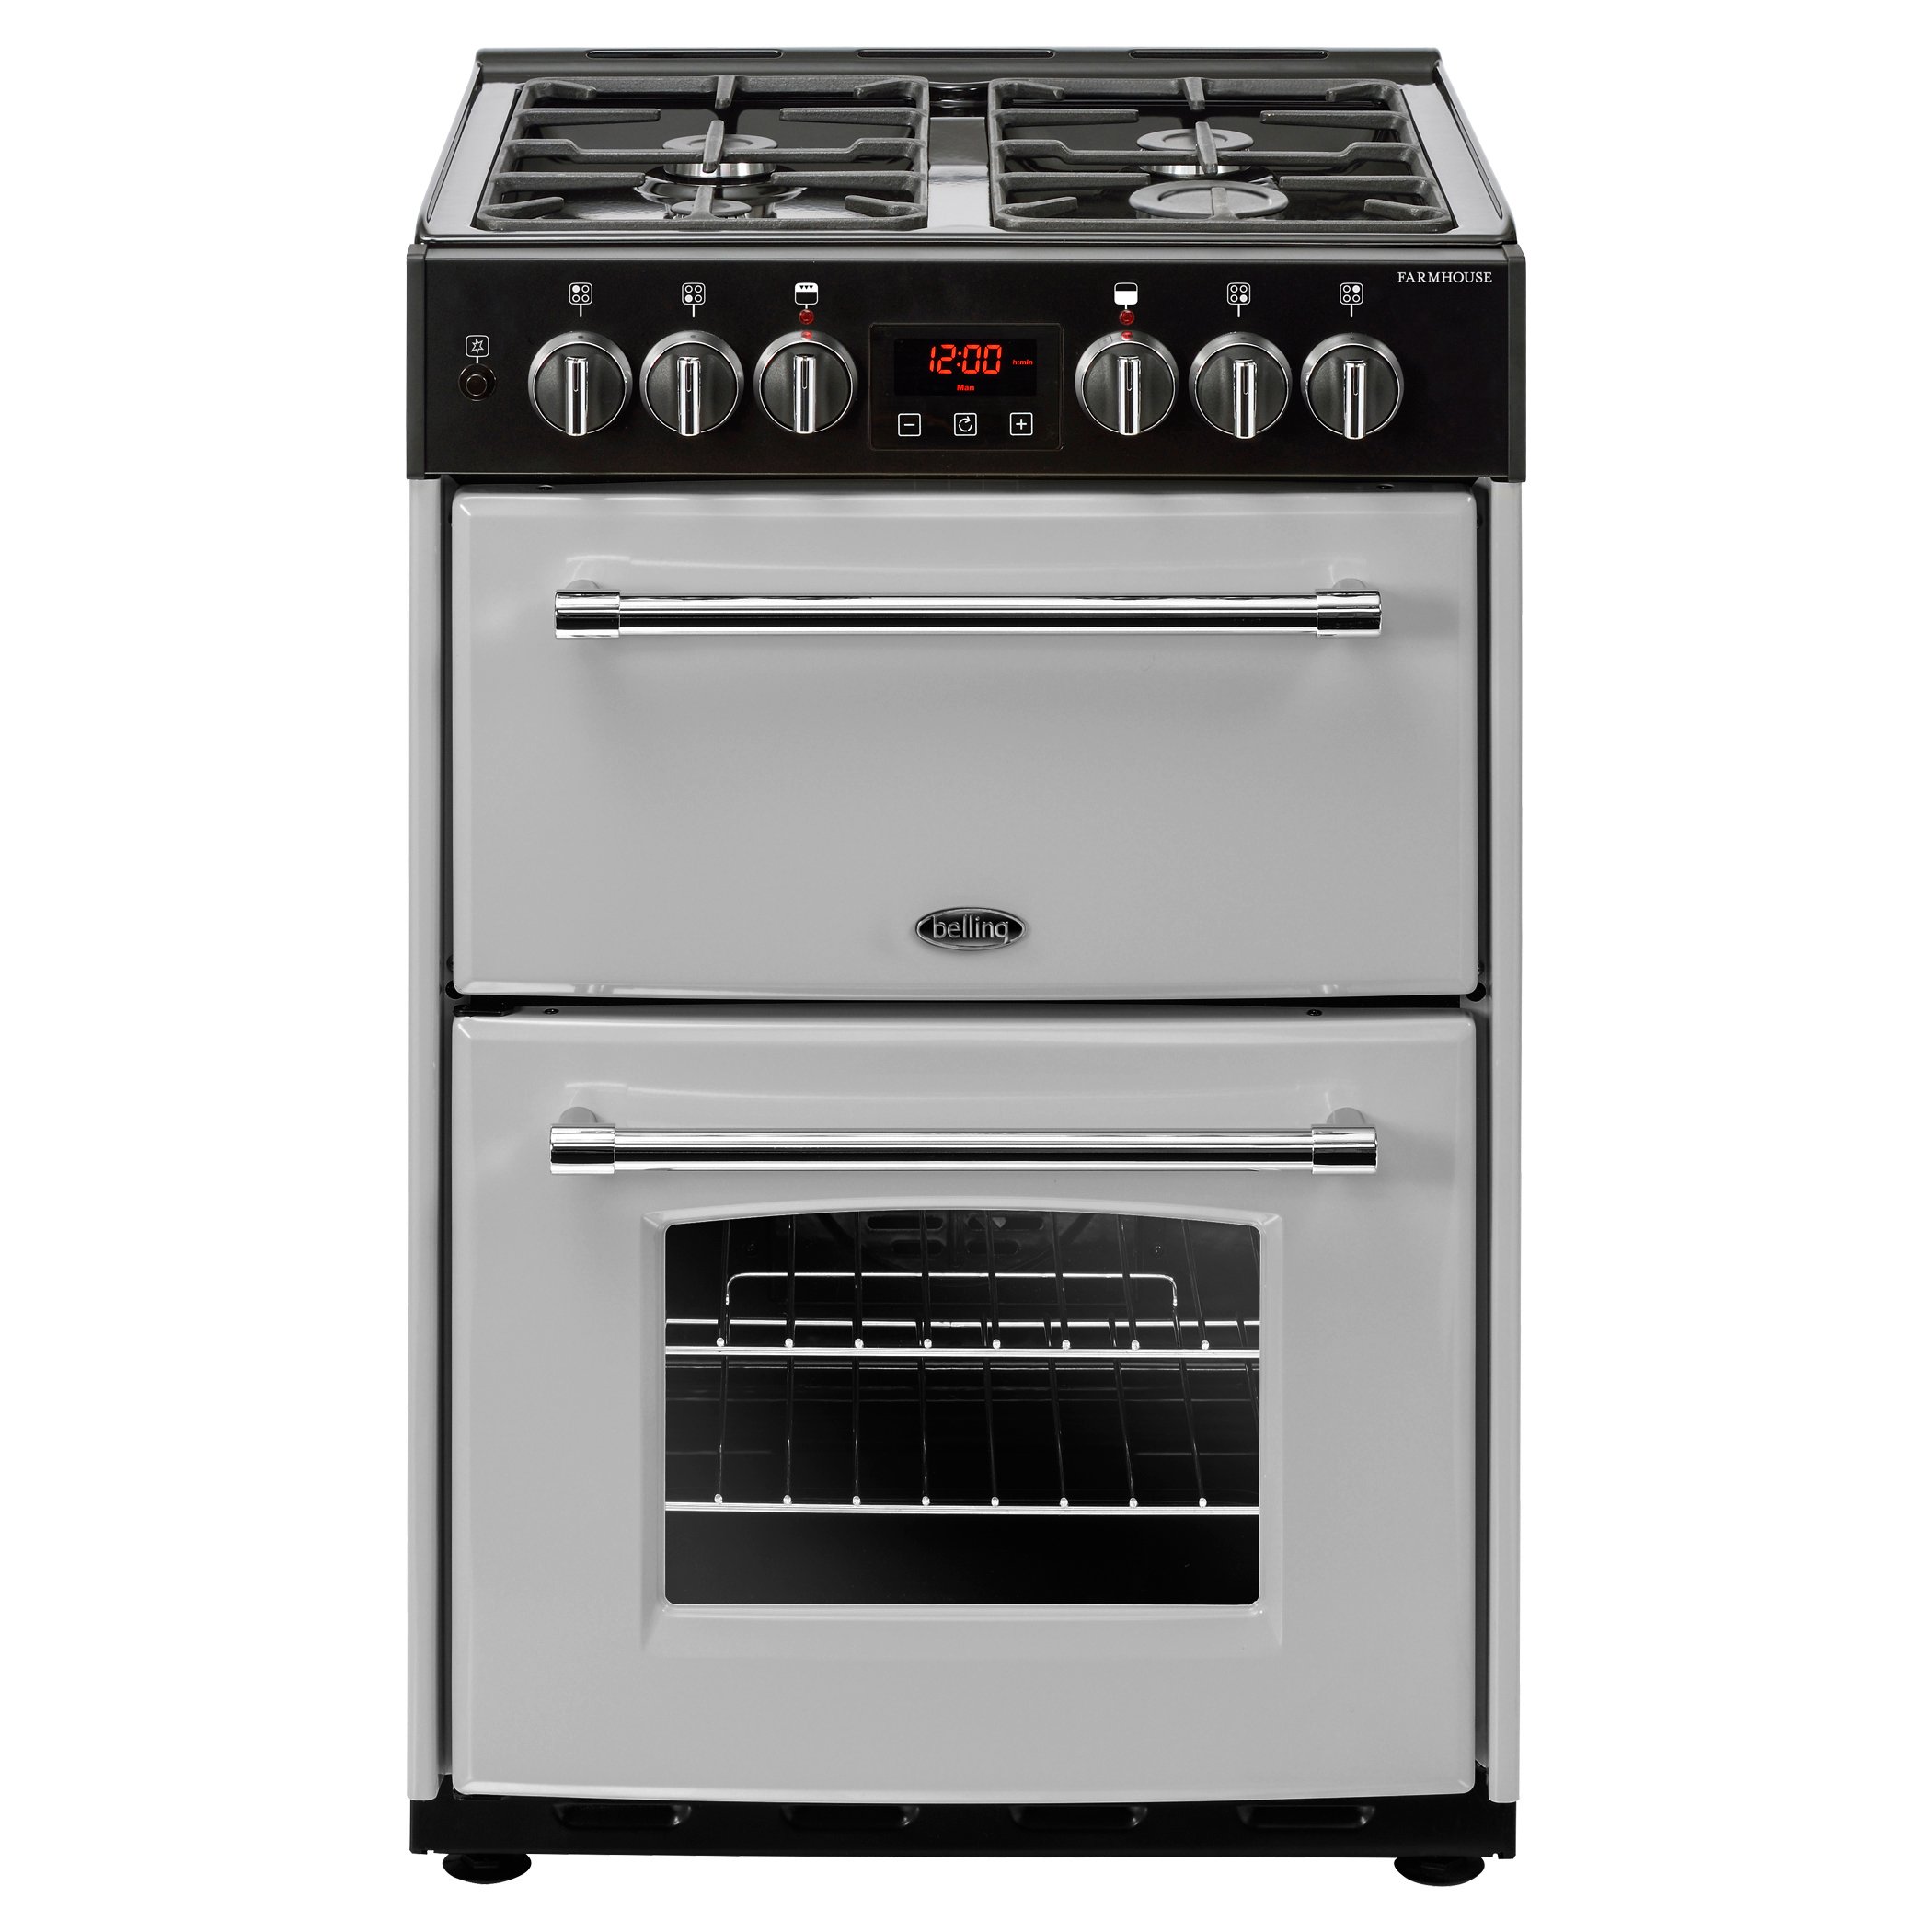 60cm Dual Fuel Range Cooker With A 4 Burner Gas Hob, Conventional Oven & Grill and Fanned Main Oven